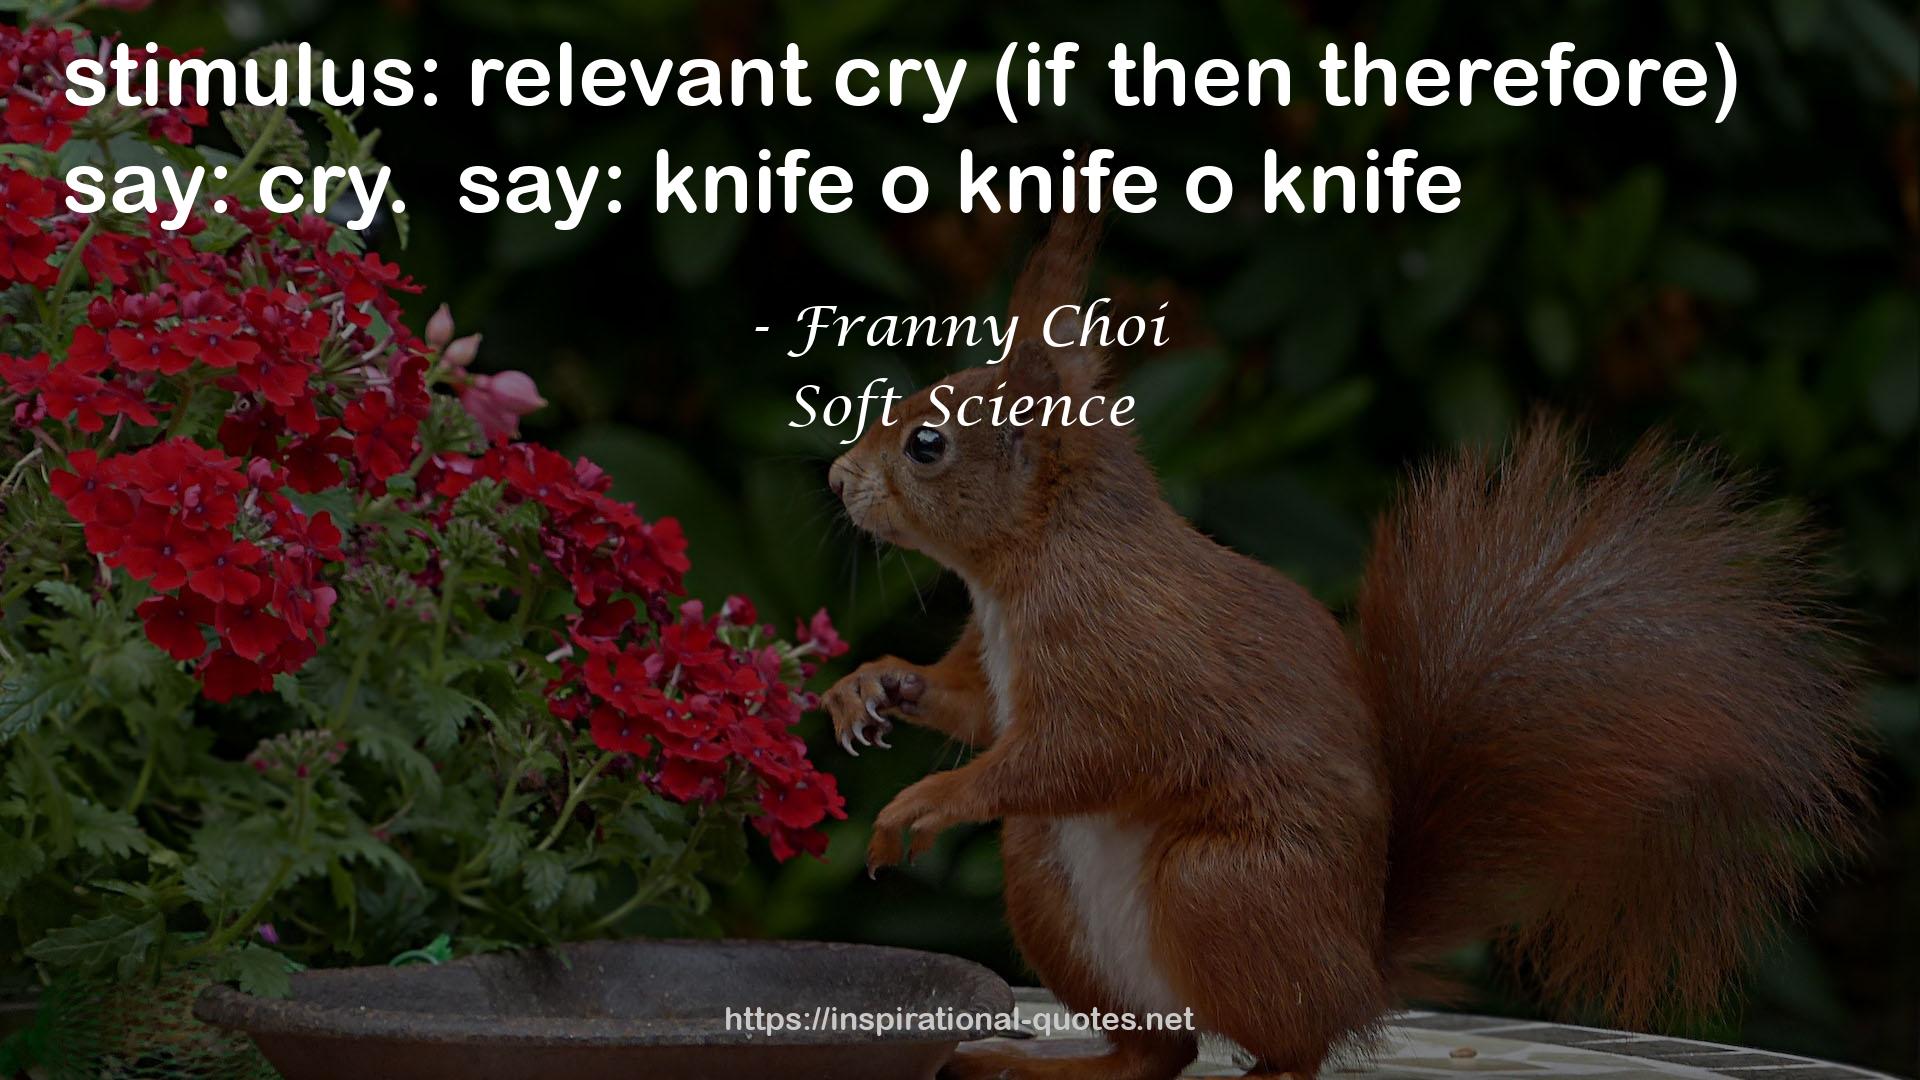 Franny Choi QUOTES